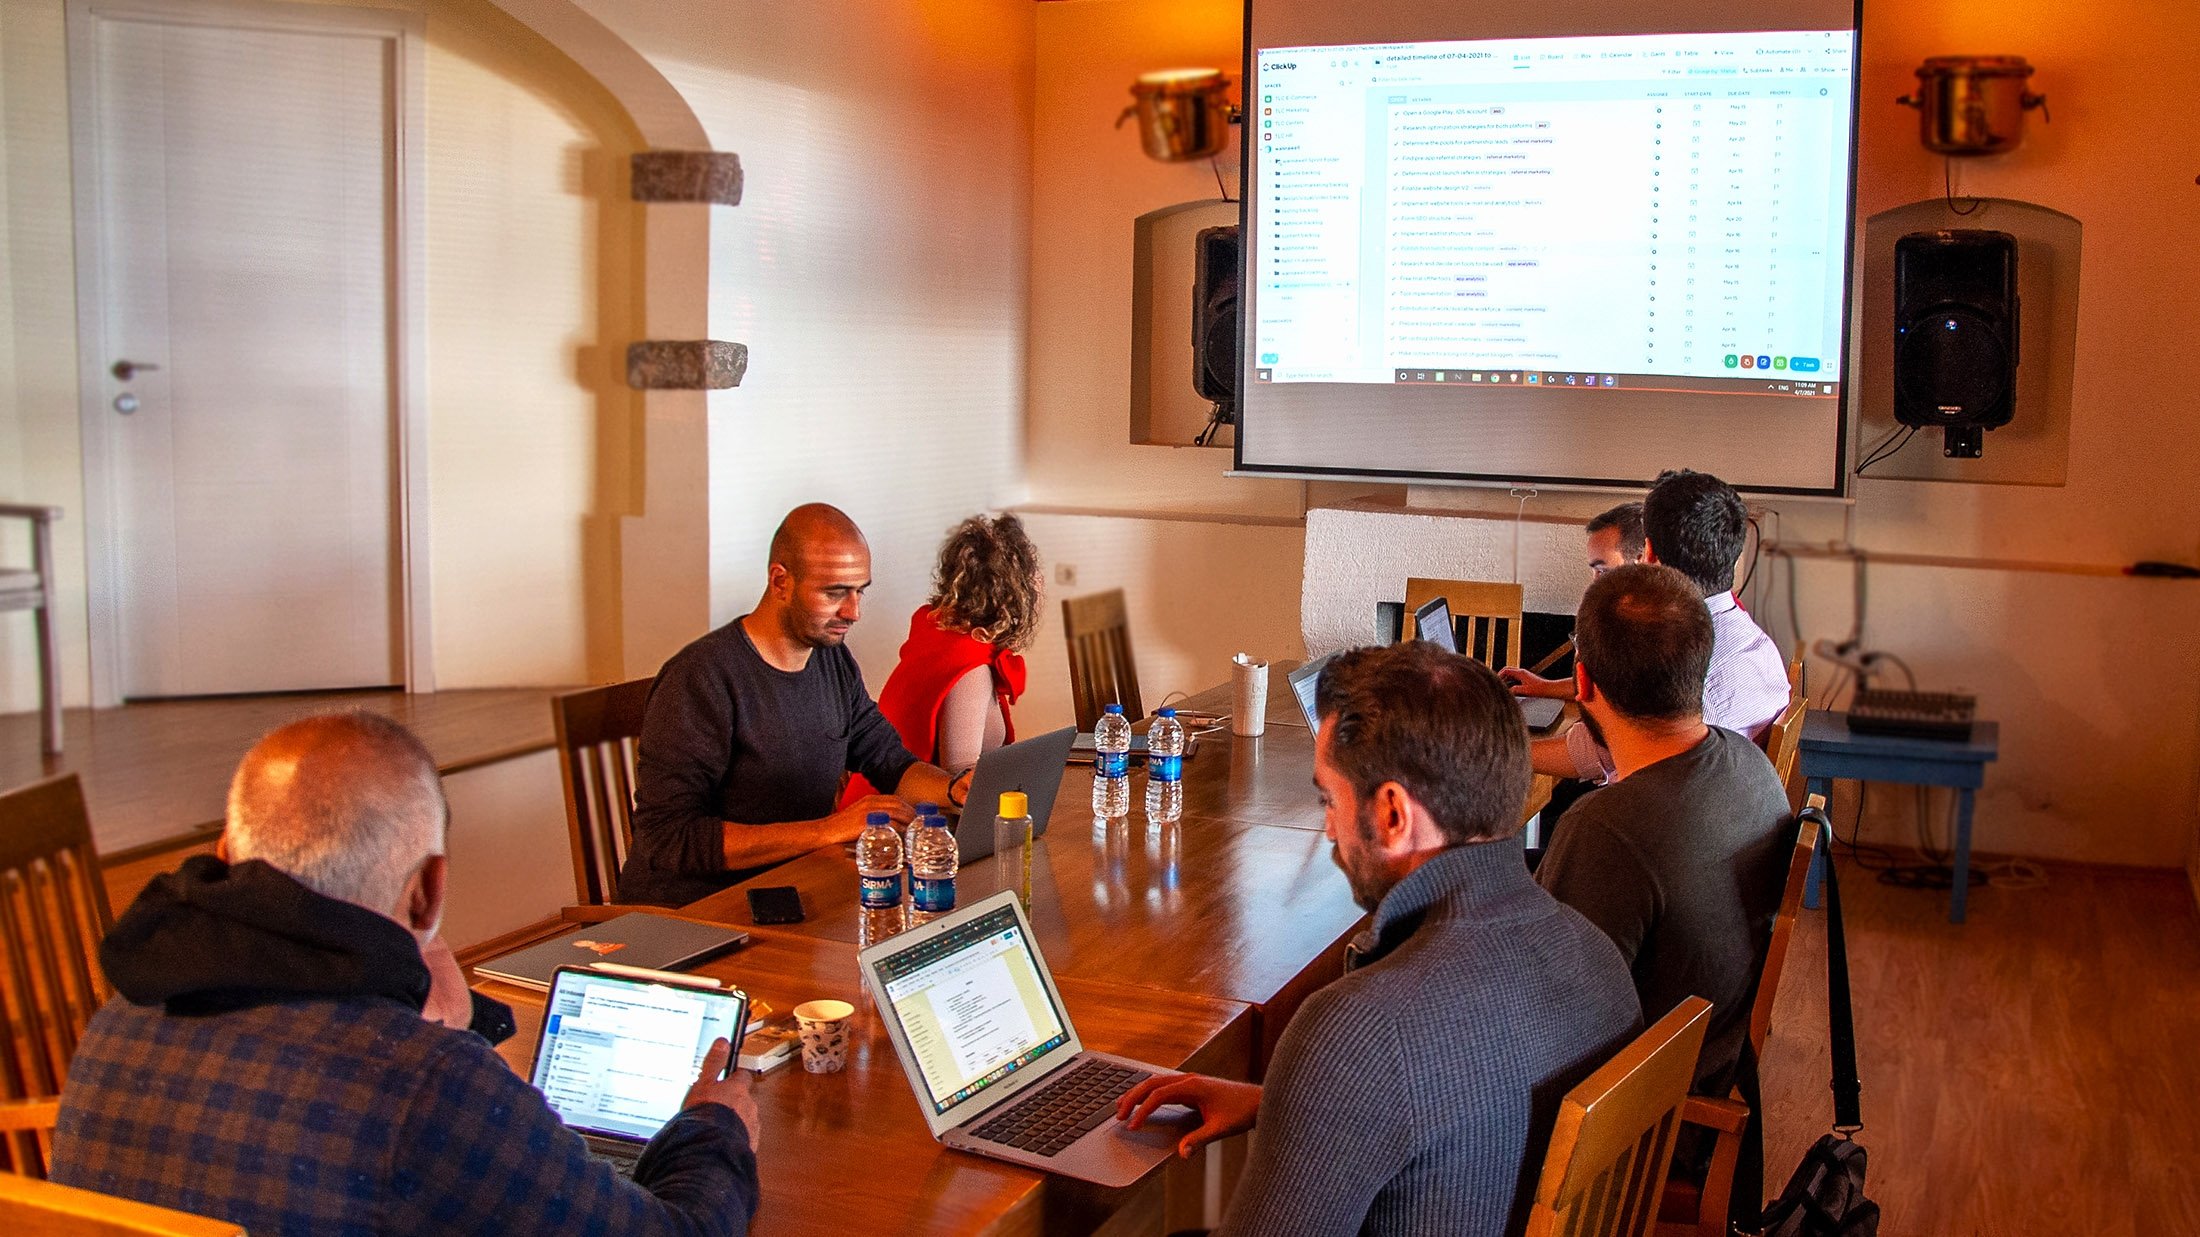 Bodrum Coworking hosts a networking event for online entrepreneurs. (Photo provided to the press)